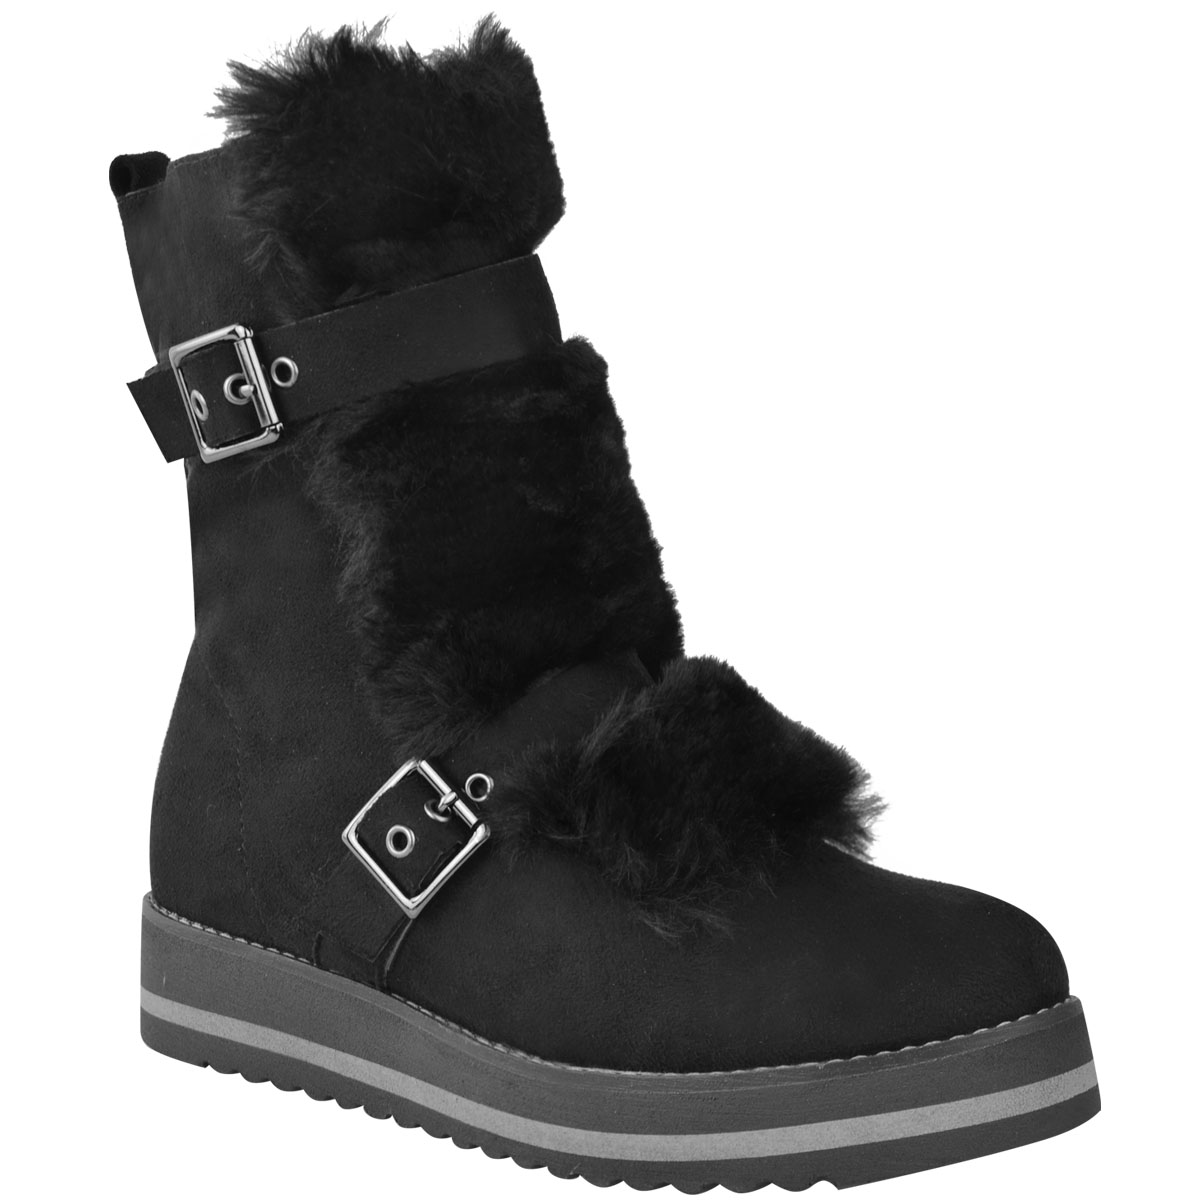 Womens Ladies Low Wedge Flat Winter Snow Ankle Boots Fleece Lining ...